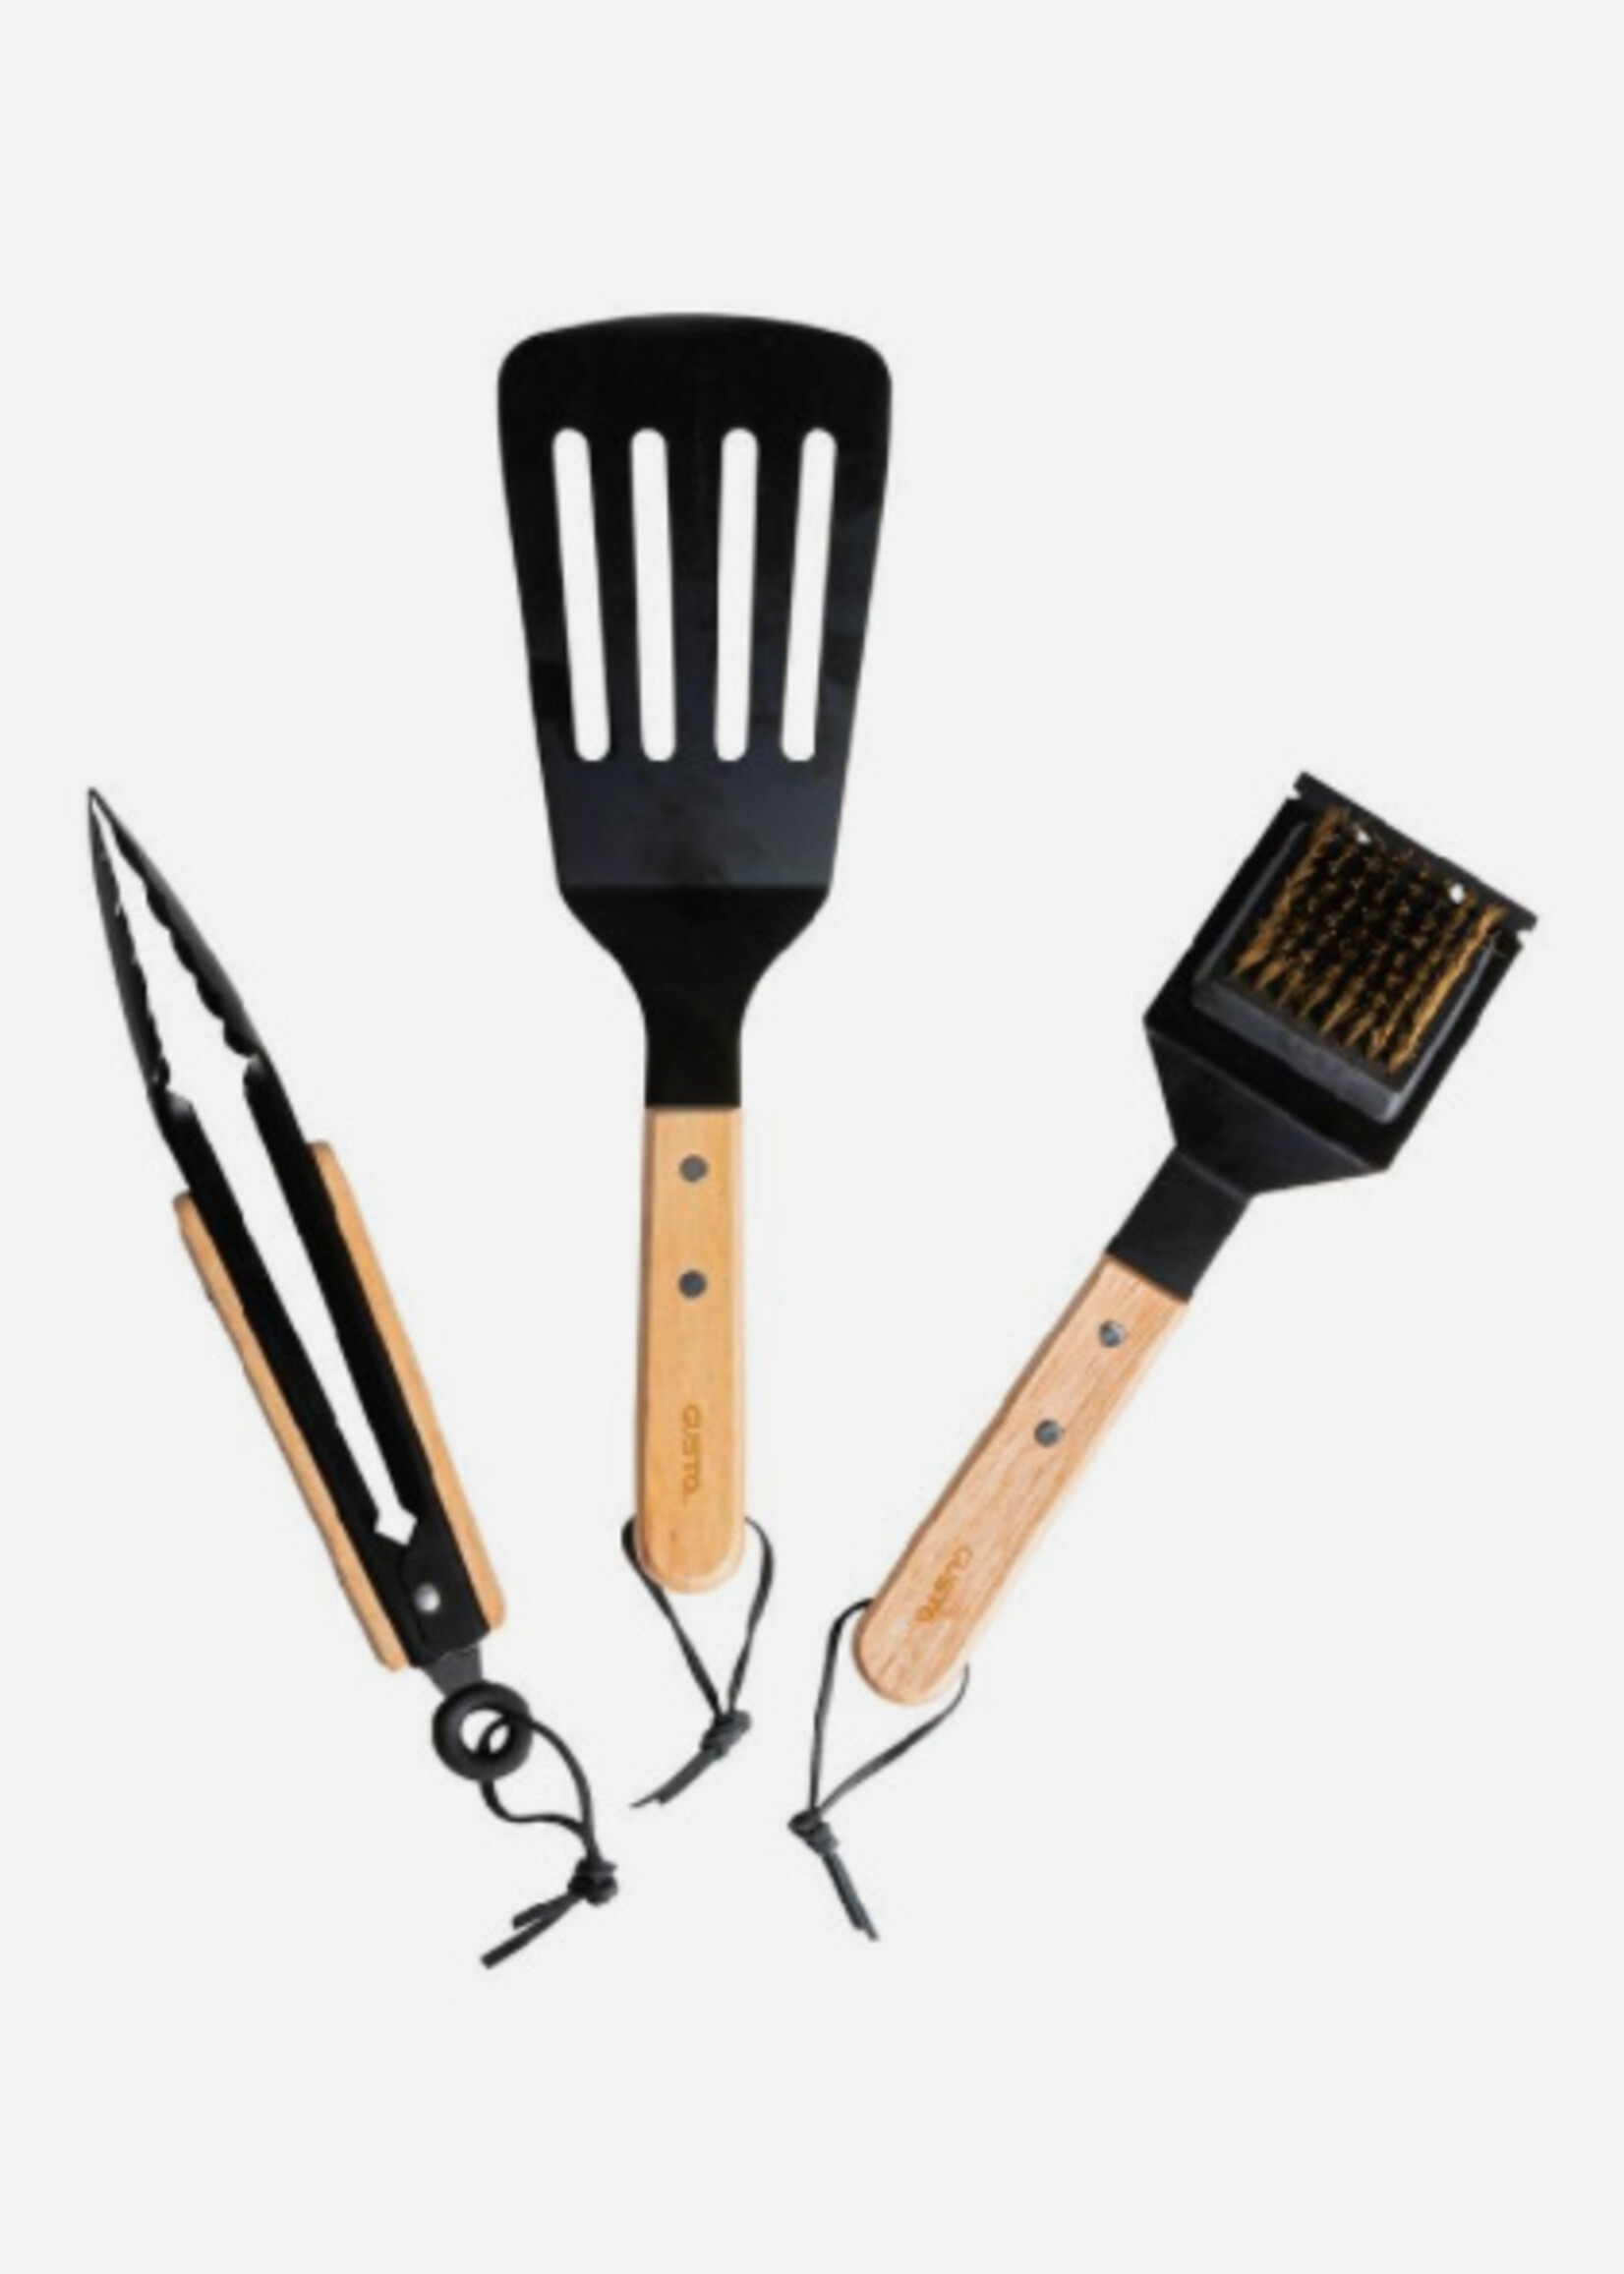 Gusta Outils barbecue noirs